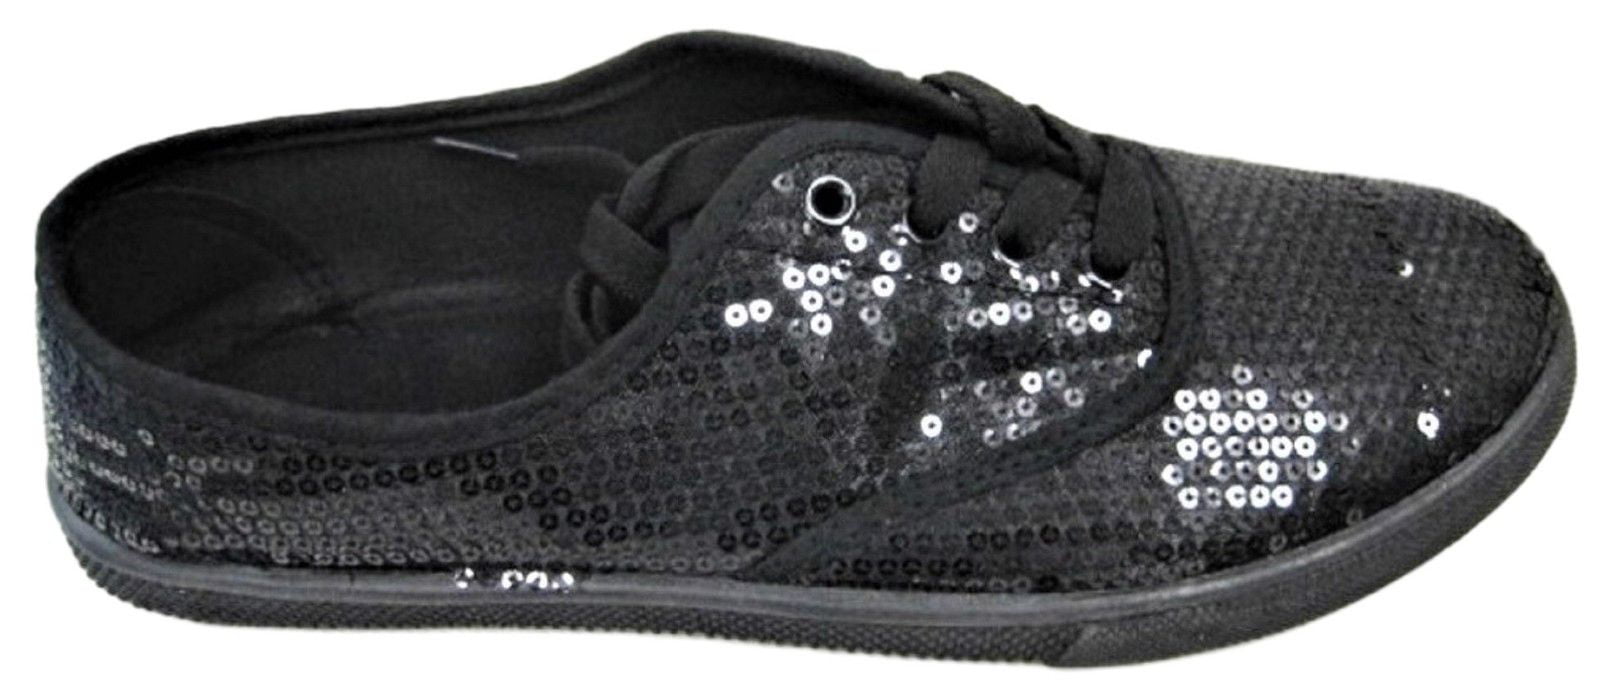 sparkle tennis shoes for adults